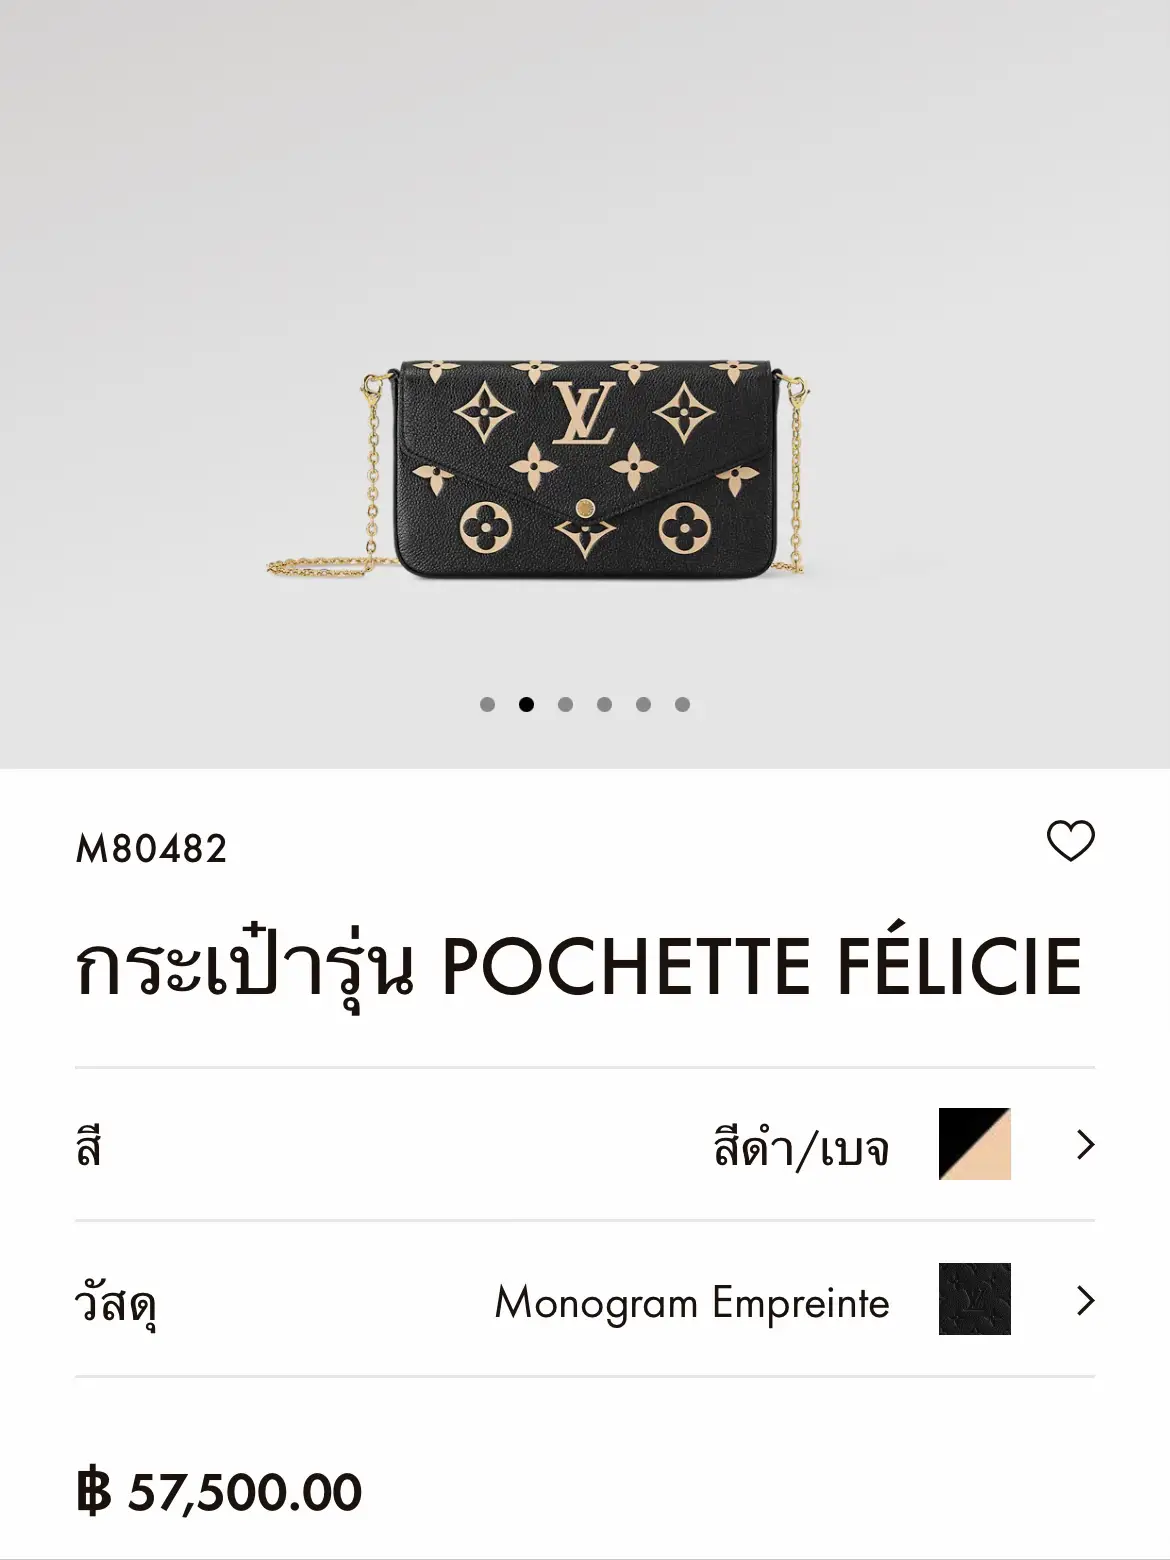 My Christmas gift to myself - the double zip pochette! I don't